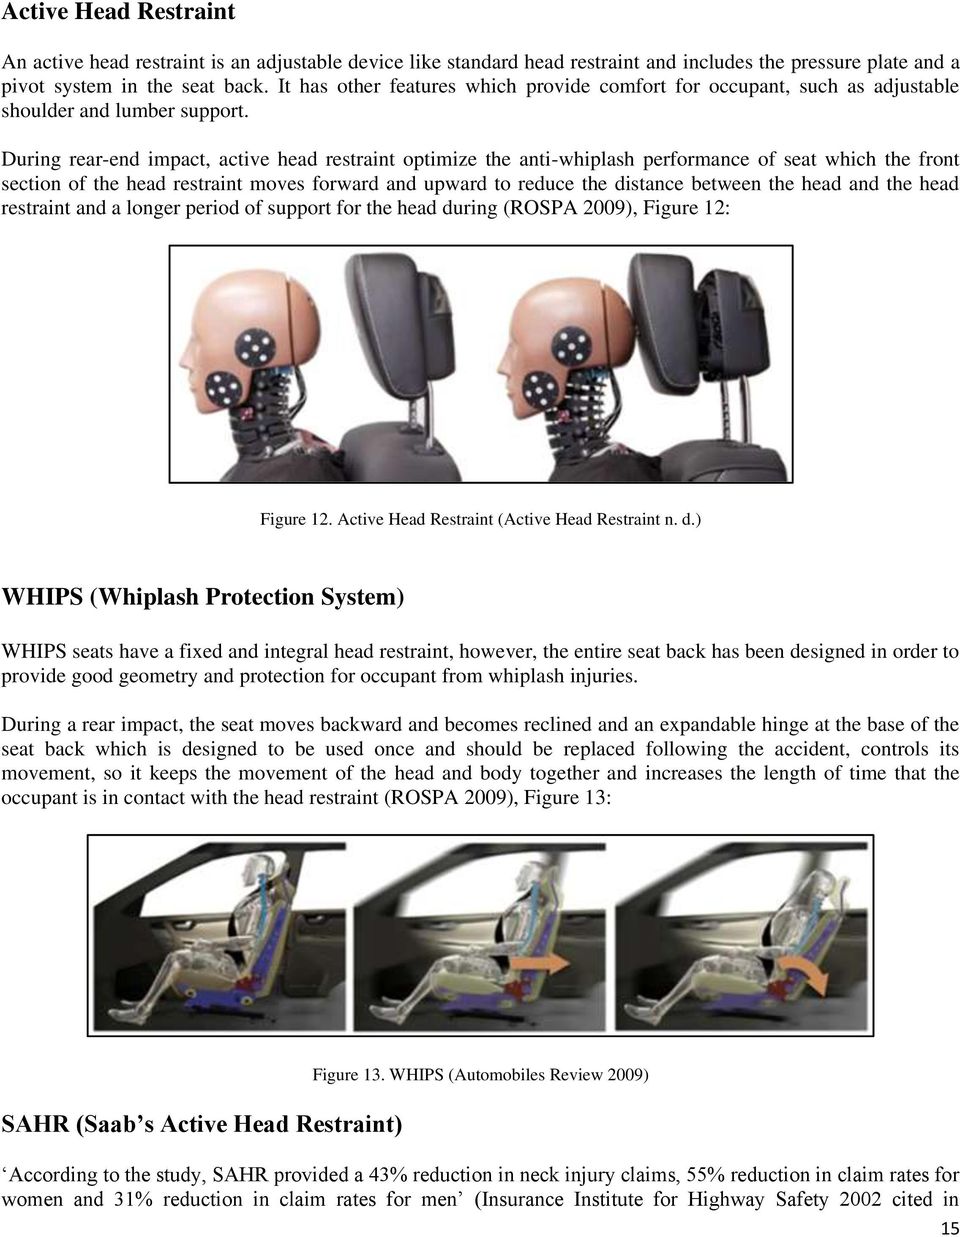 During rear-end impact, active head restraint optimize the anti-whiplash performance of seat which the front section of the head restraint moves forward and upward to reduce the distance between the